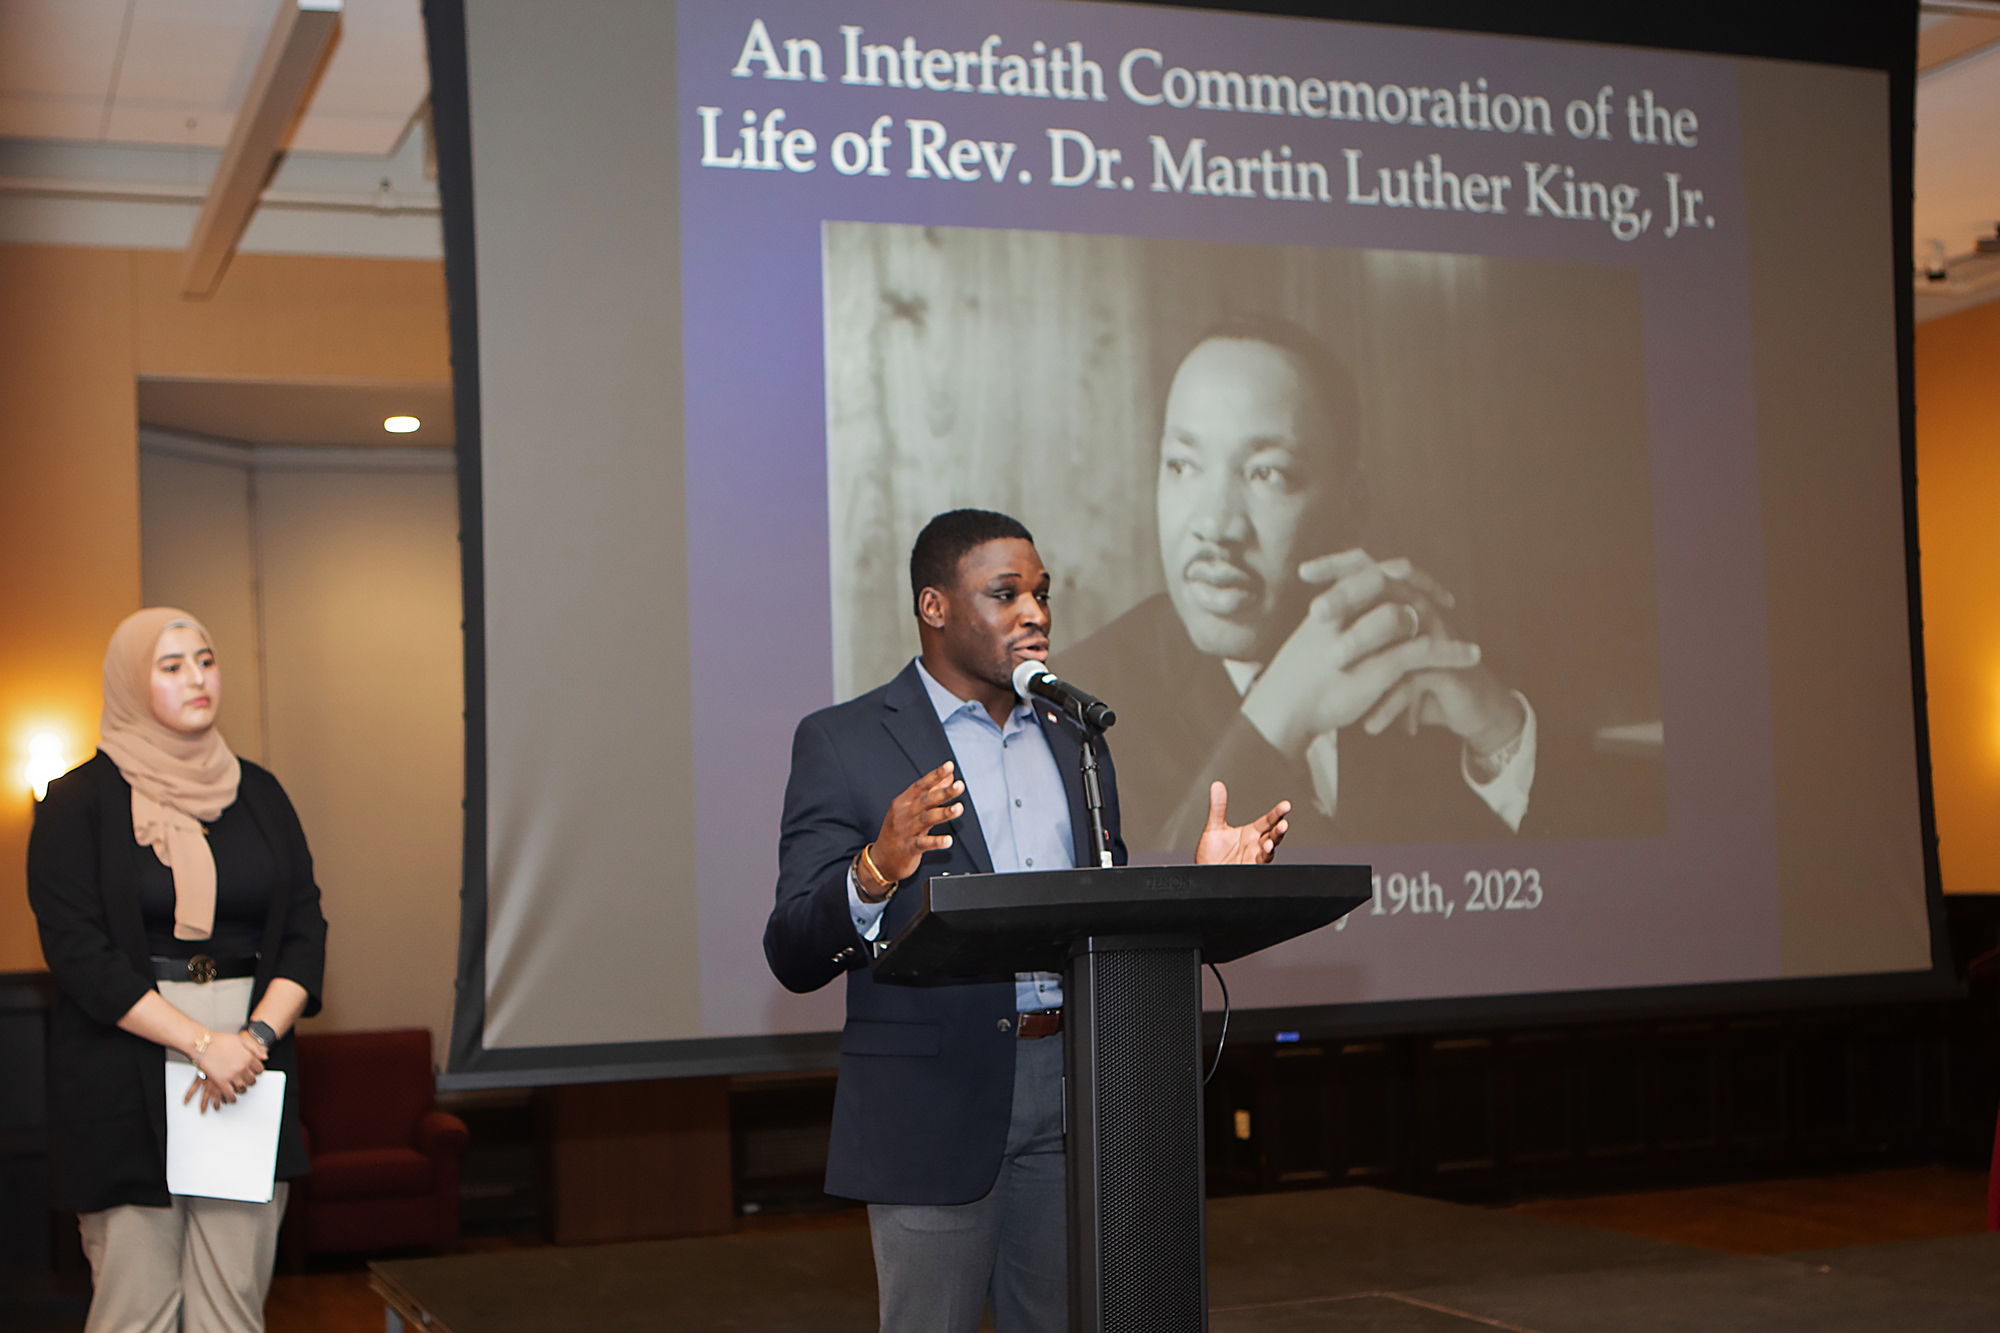 Graduate student Ayo Aladesanmi spoke about the legacy of Dr. King at the Interfaith Commemoration of the Life of Martin Luther King Jr.